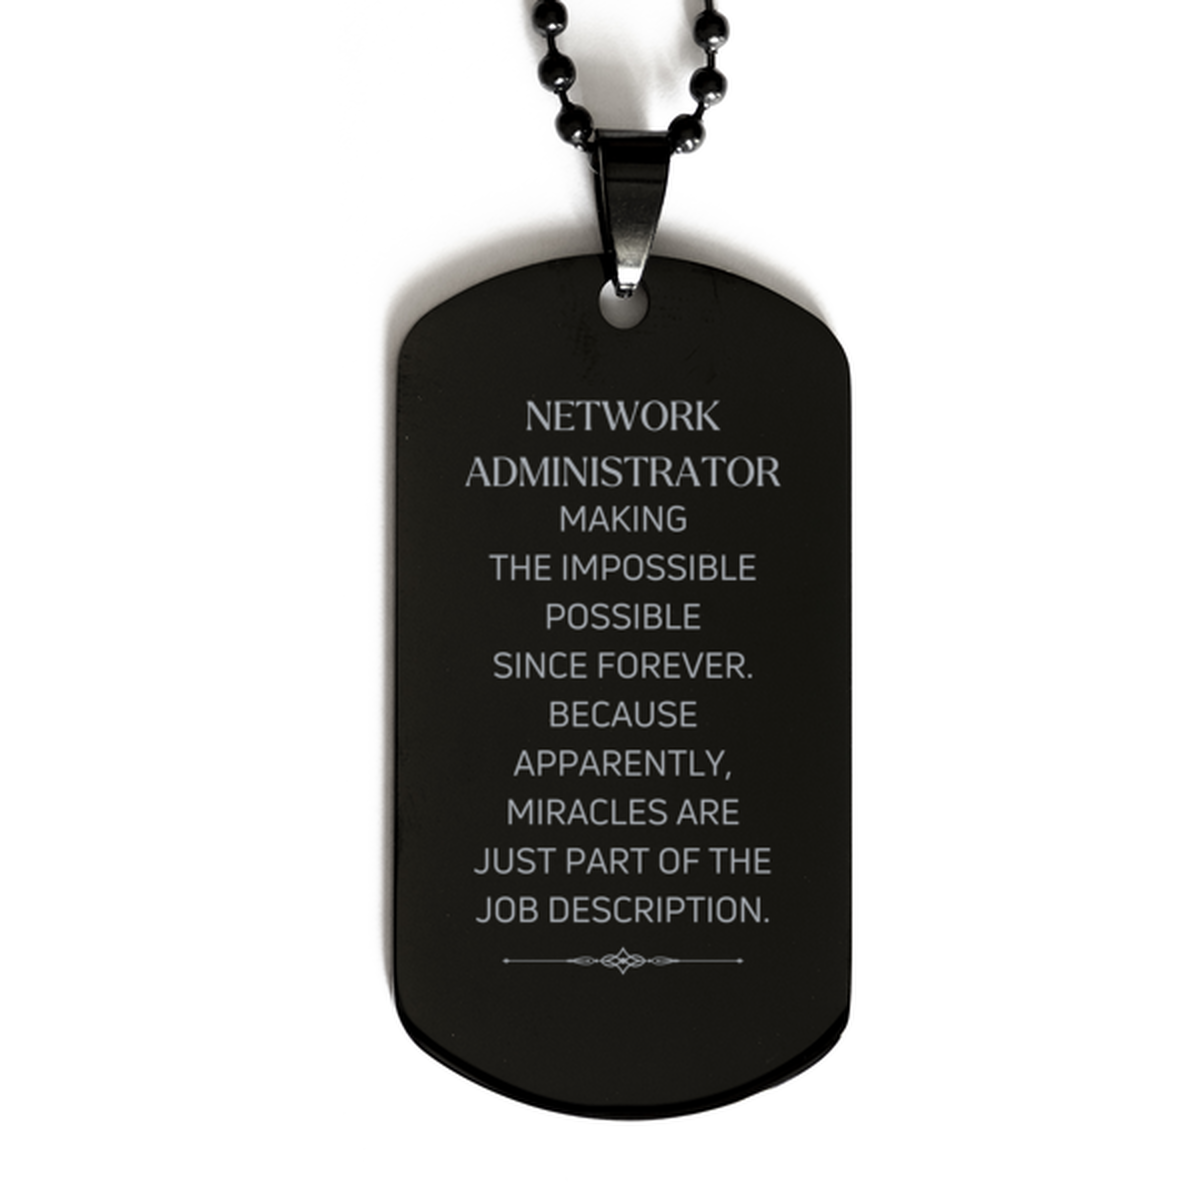 Funny Network Administrator Gifts, Miracles are just part of the job description, Inspirational Birthday Black Dog Tag For Network Administrator, Men, Women, Coworkers, Friends, Boss